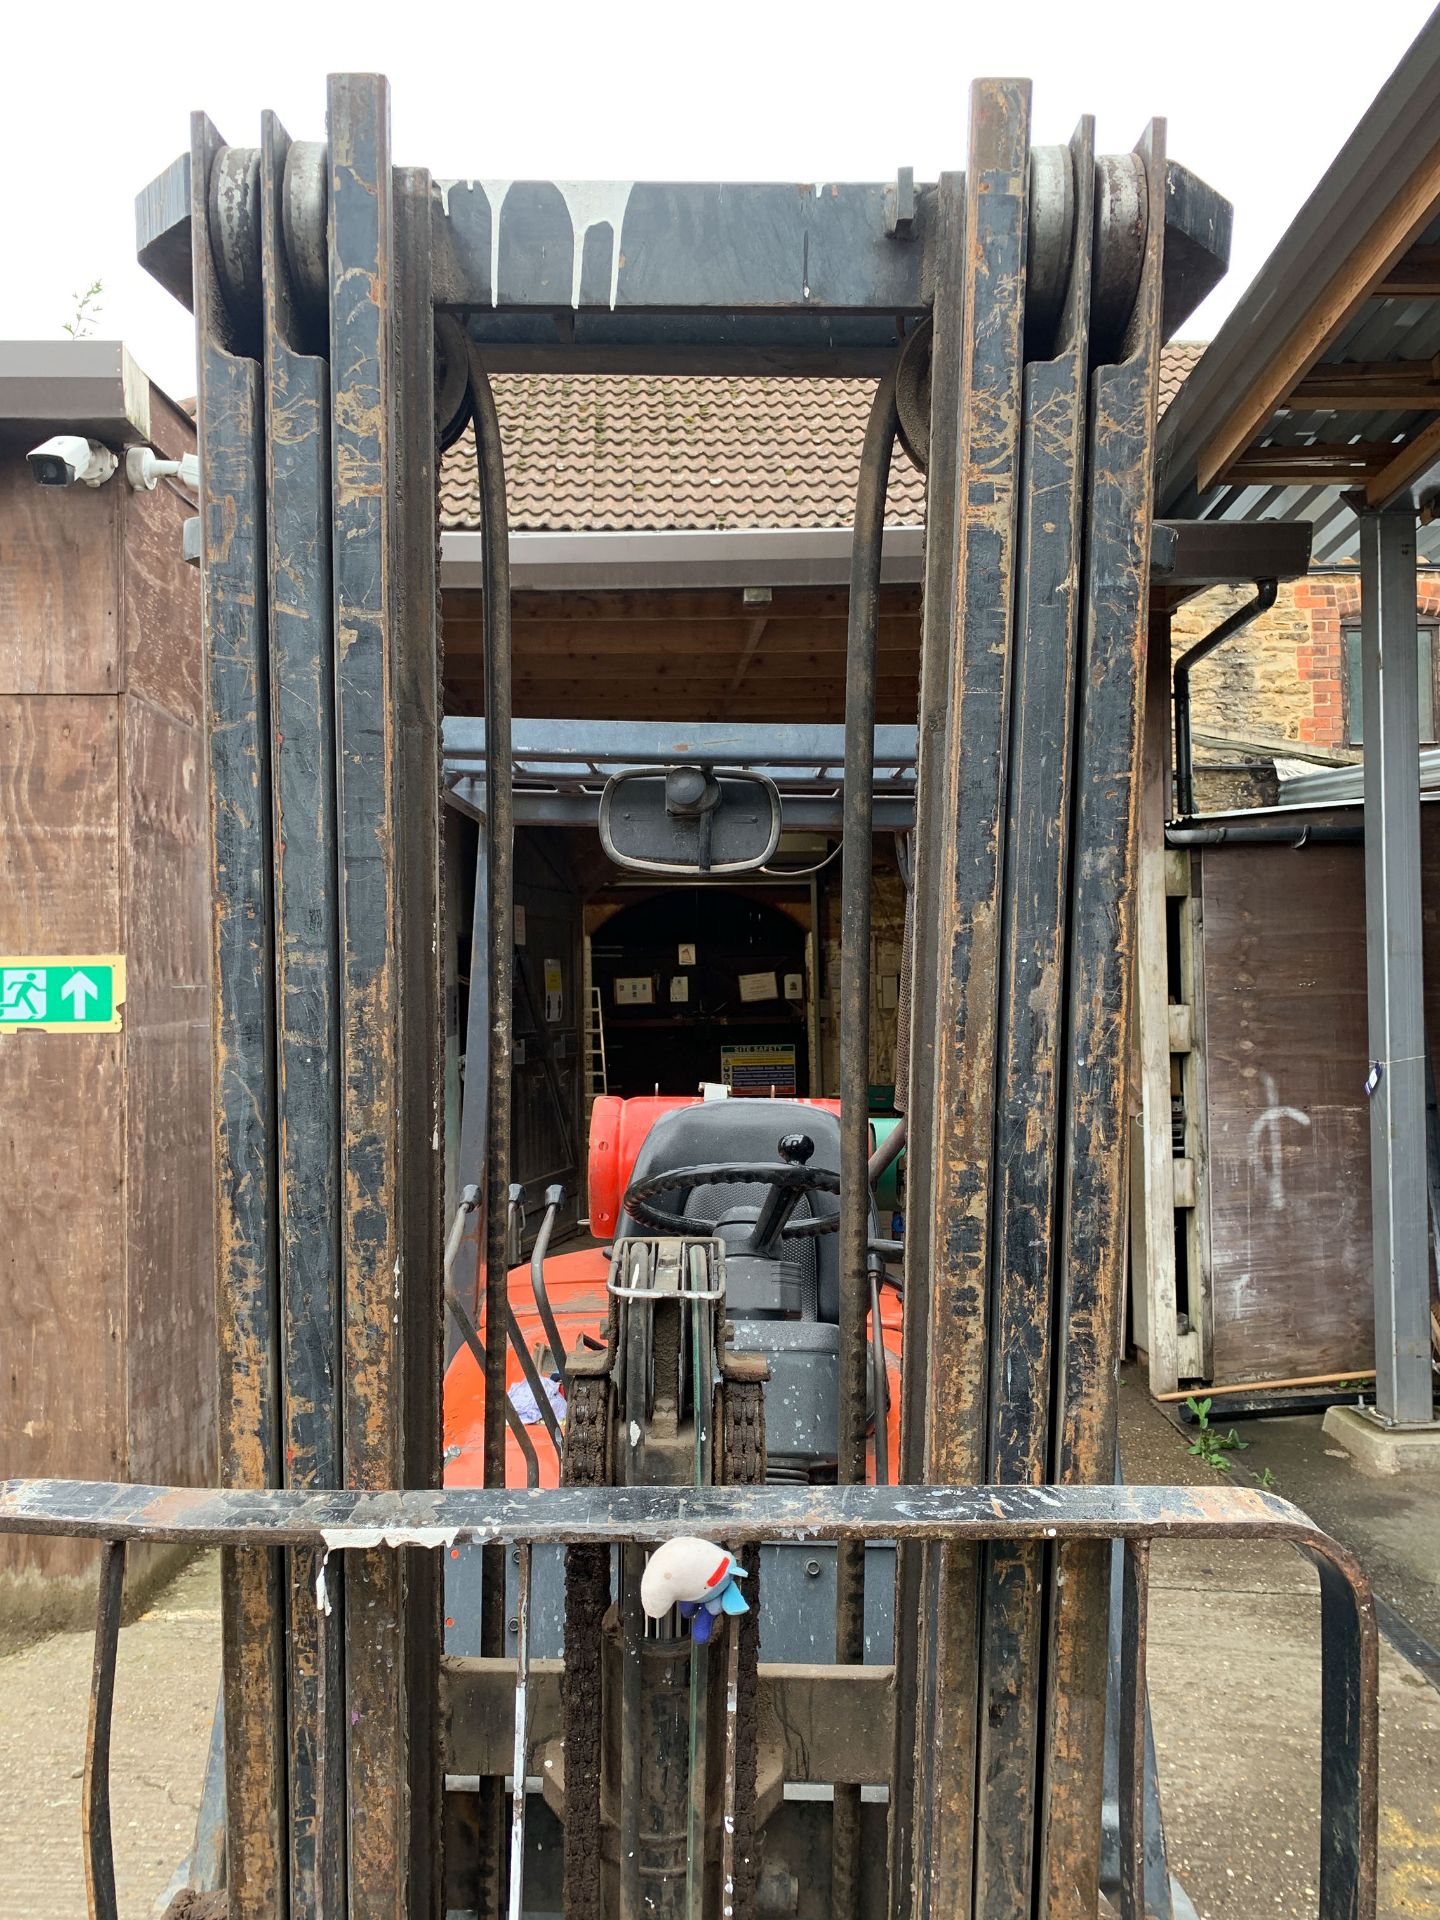 Toyota 25 Duplex Mast Gas Powered Forklift Truck with Fitted Sideshift Attachment - Image 6 of 14